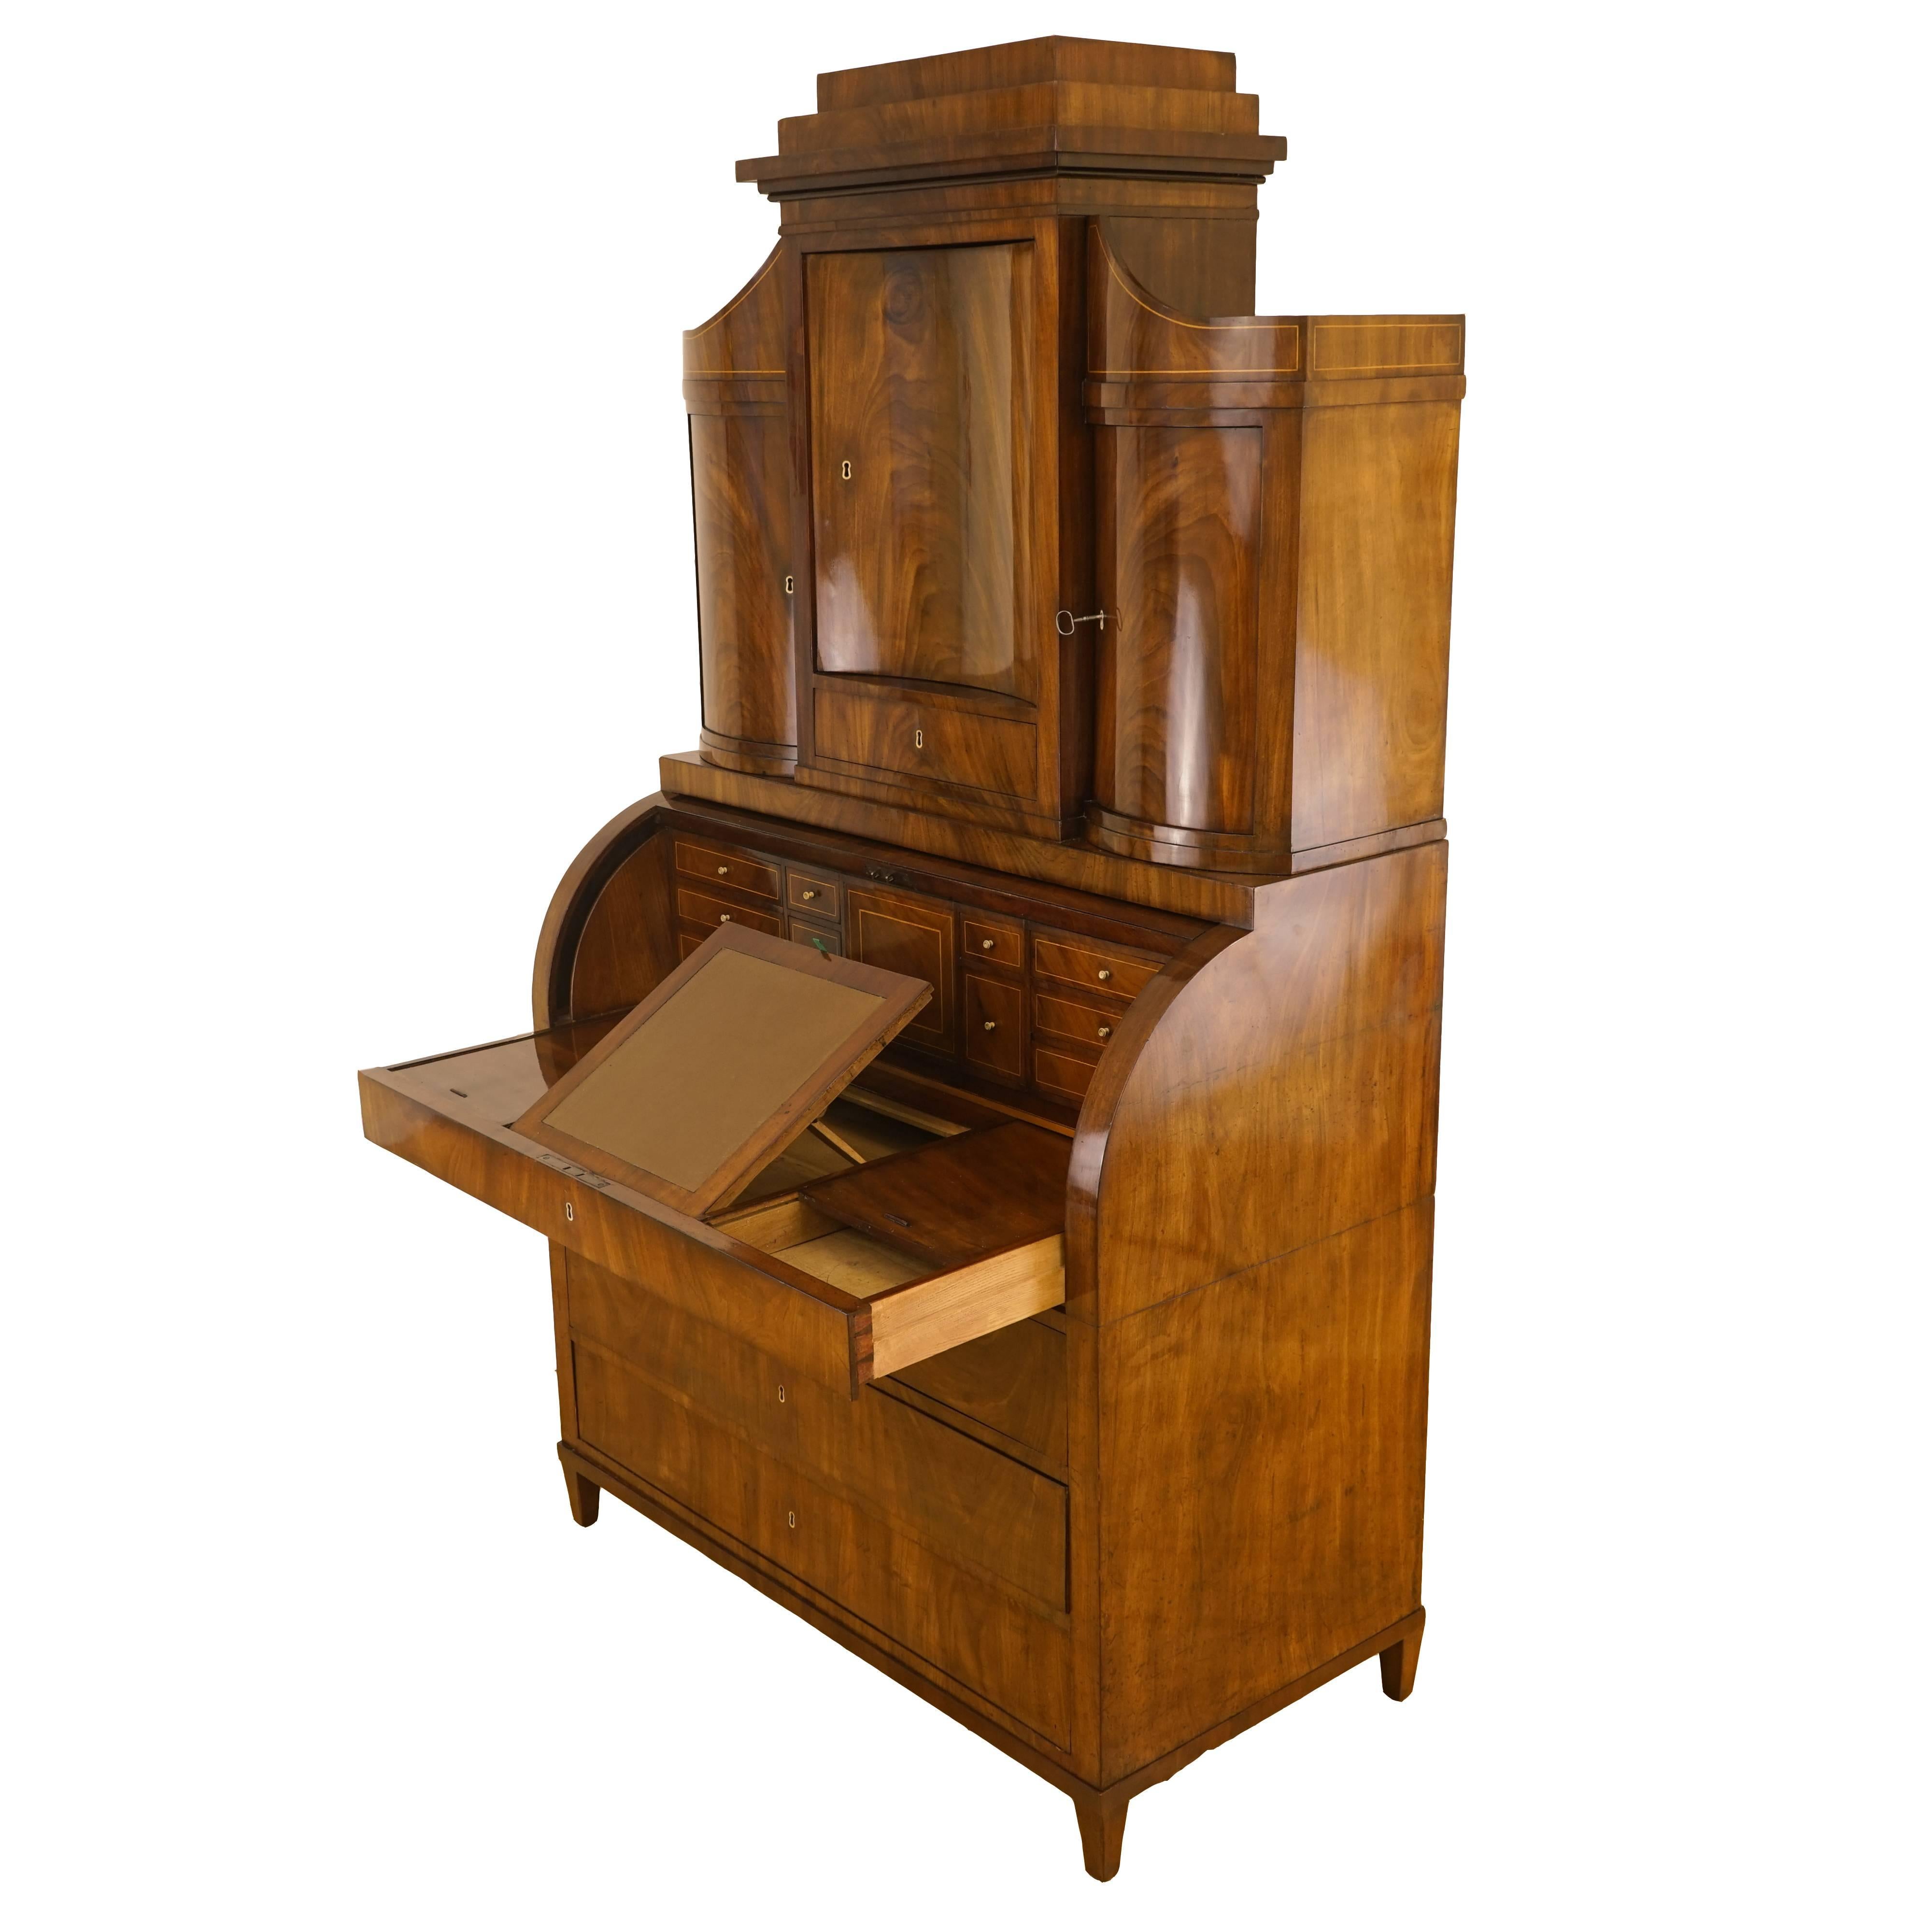 A perfect example of the wealthy, elegant Biedermeier period, this impressive, secretary is veneered in flame mahogany and birch intarsia, with bone escutcheons, secret compartments, locking drawers, tilting leather writing surface, cylinder top and